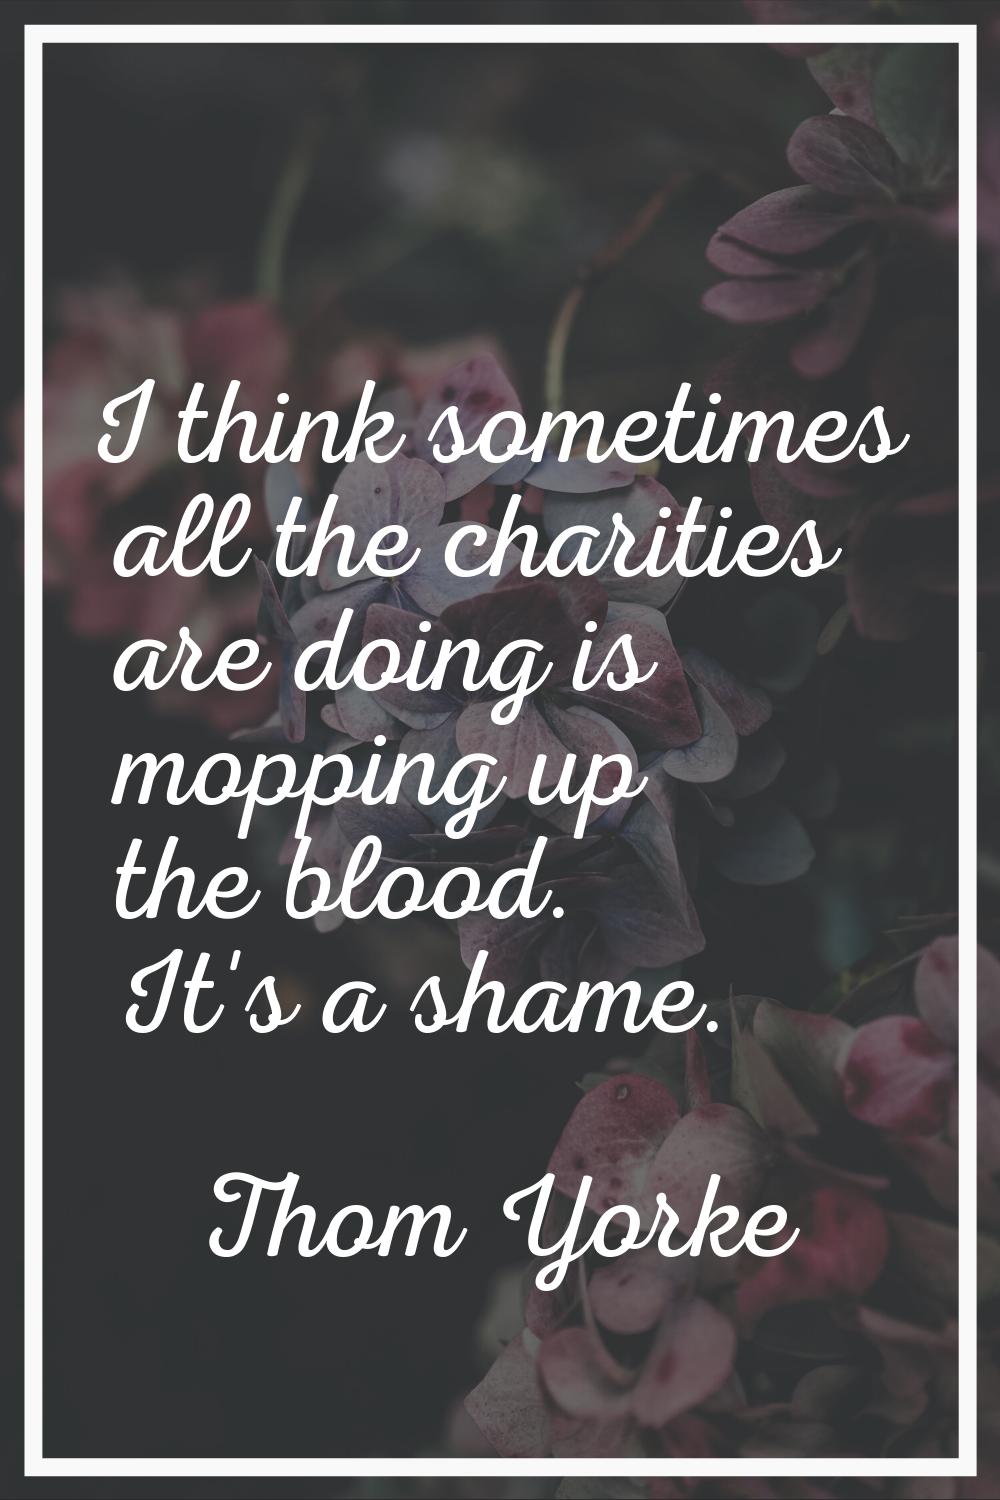 I think sometimes all the charities are doing is mopping up the blood. It's a shame.